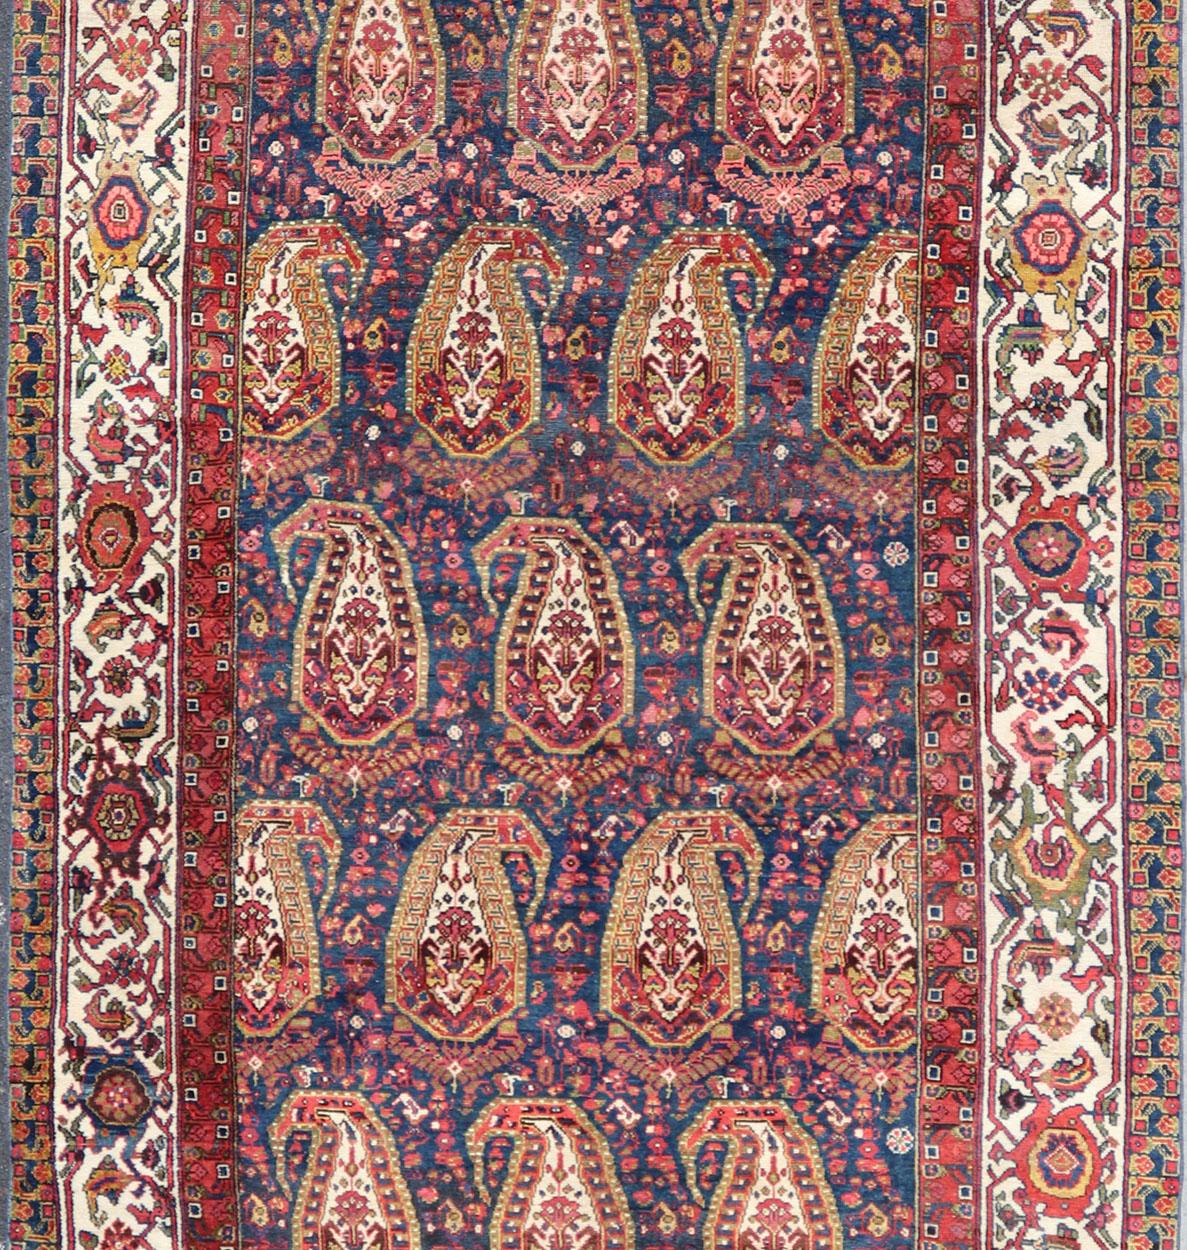 Antique Persian Paisley Field Hamadan in Multi-Tiered Border in Red and Blue For Sale 1